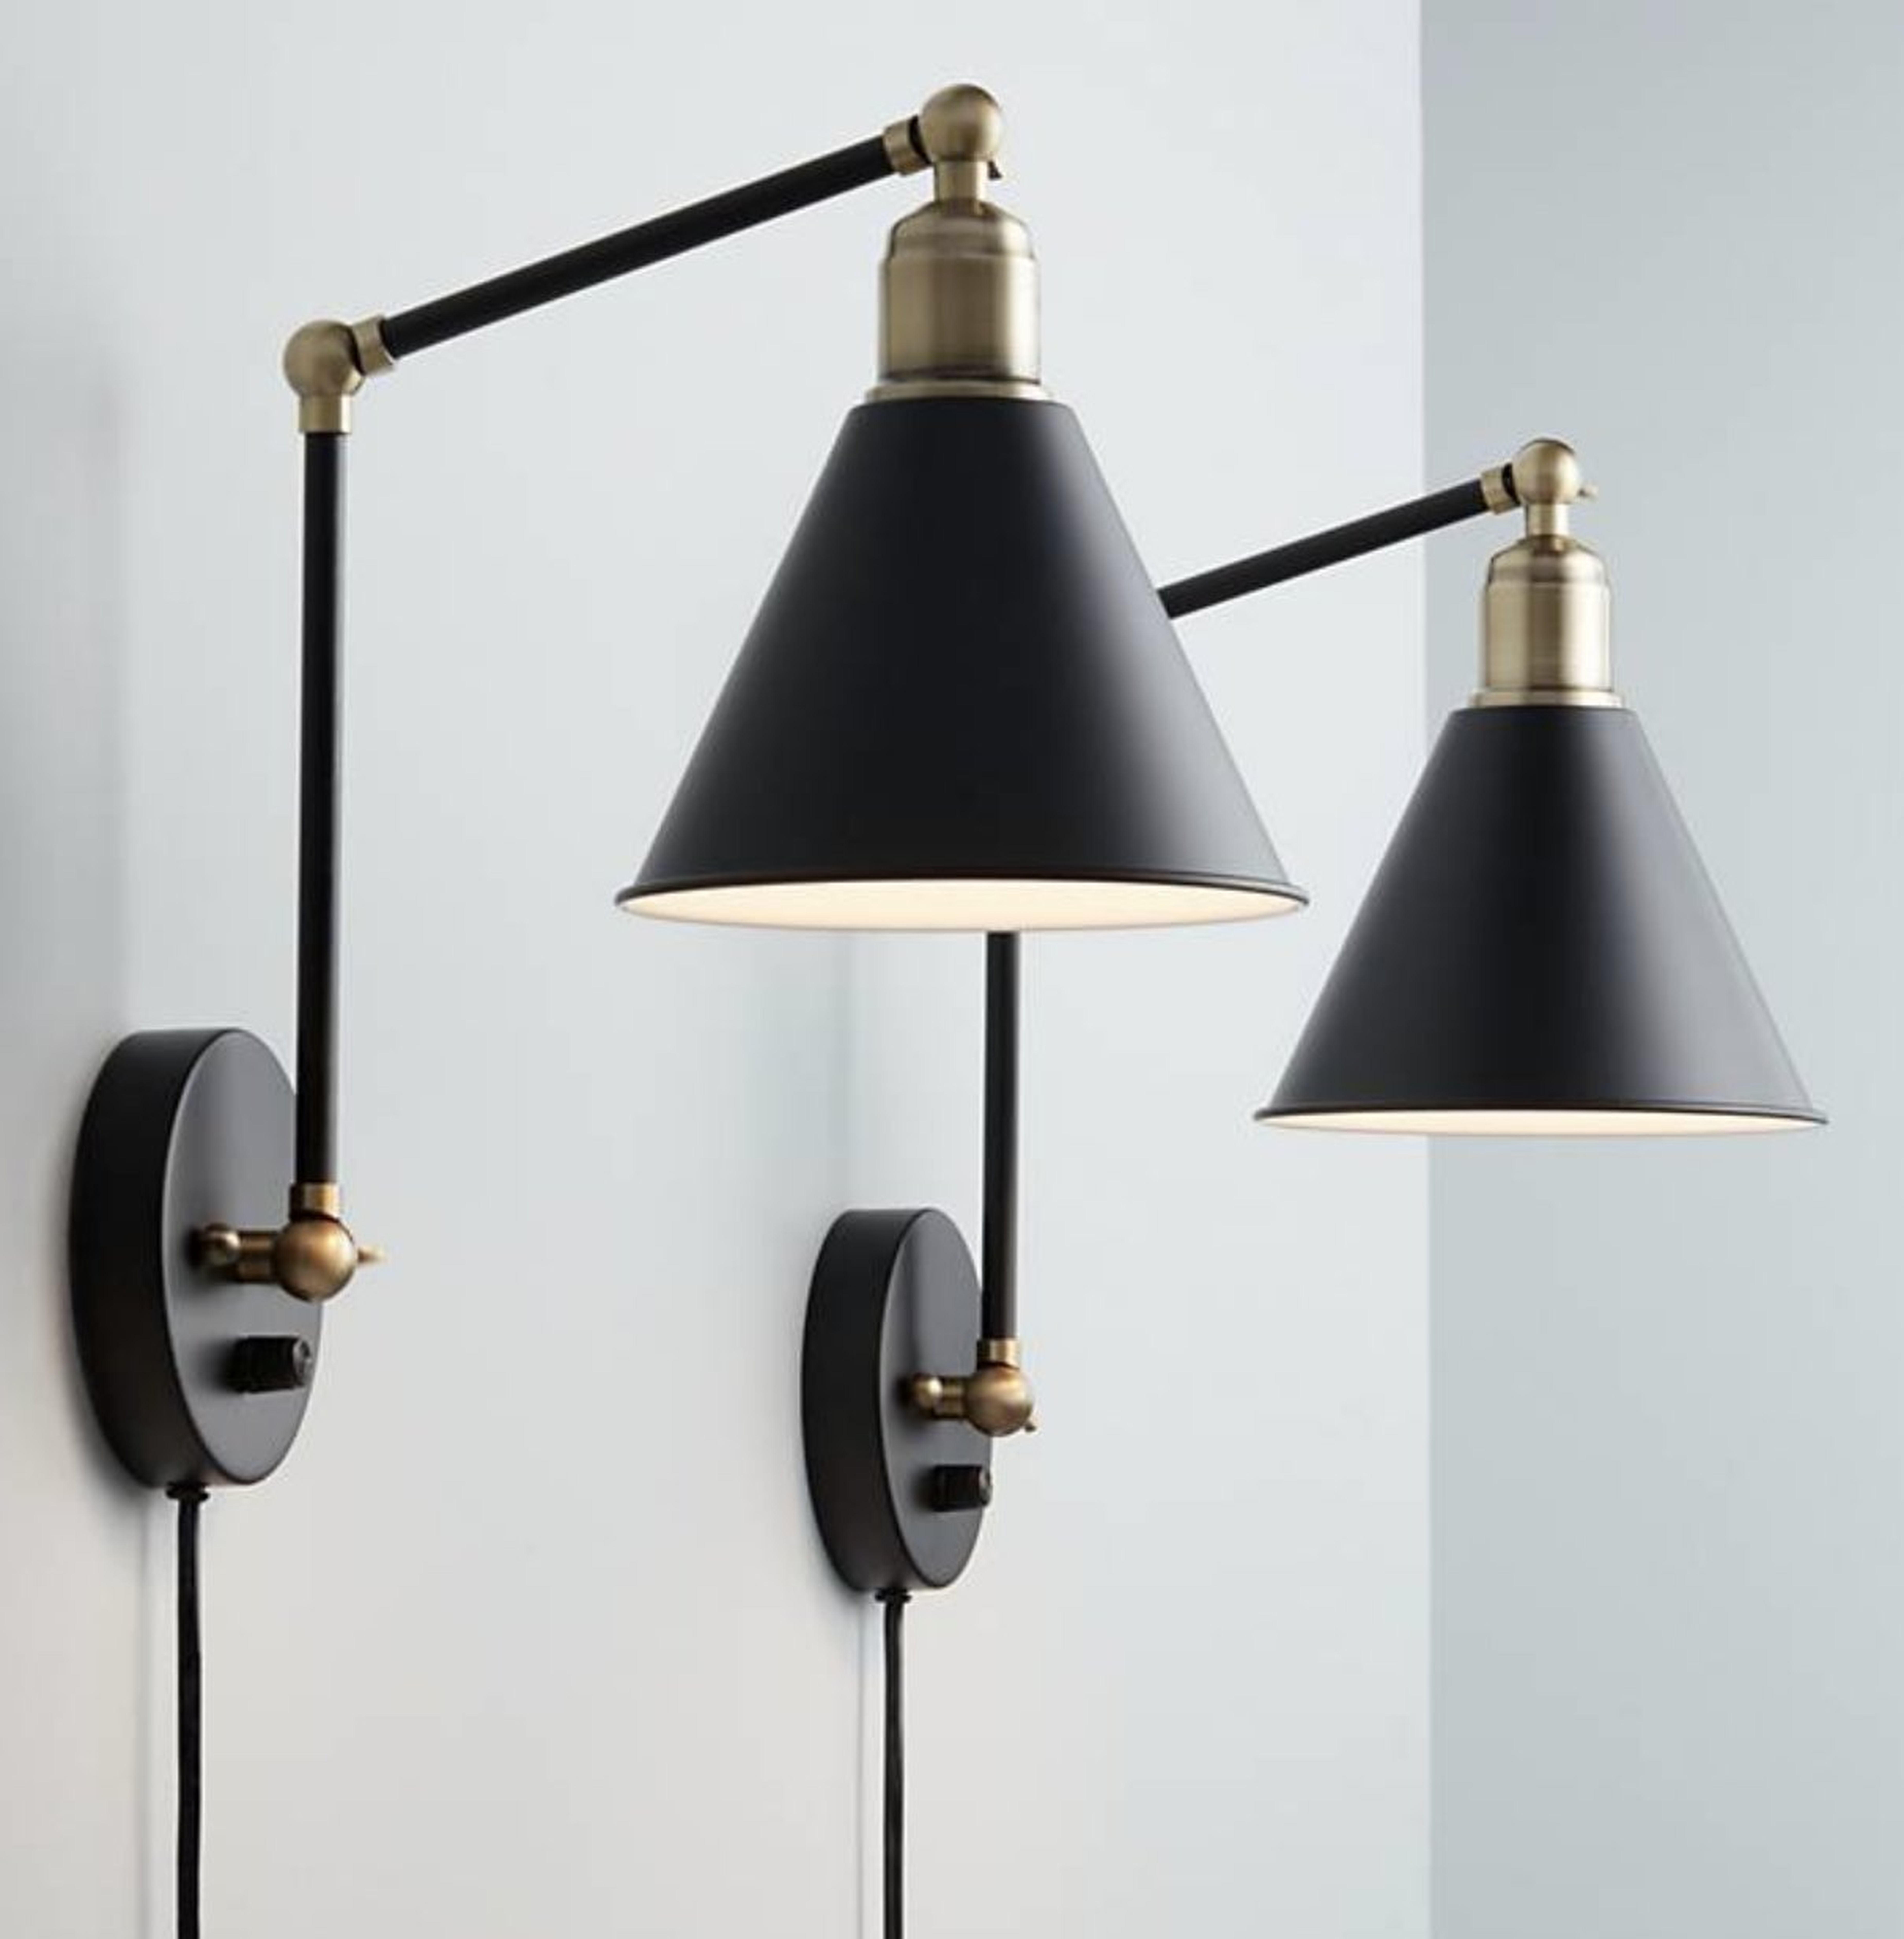 Wray Black and Antique Brass Plug-In Wall Lamp Set of 2 - Lamps Plus